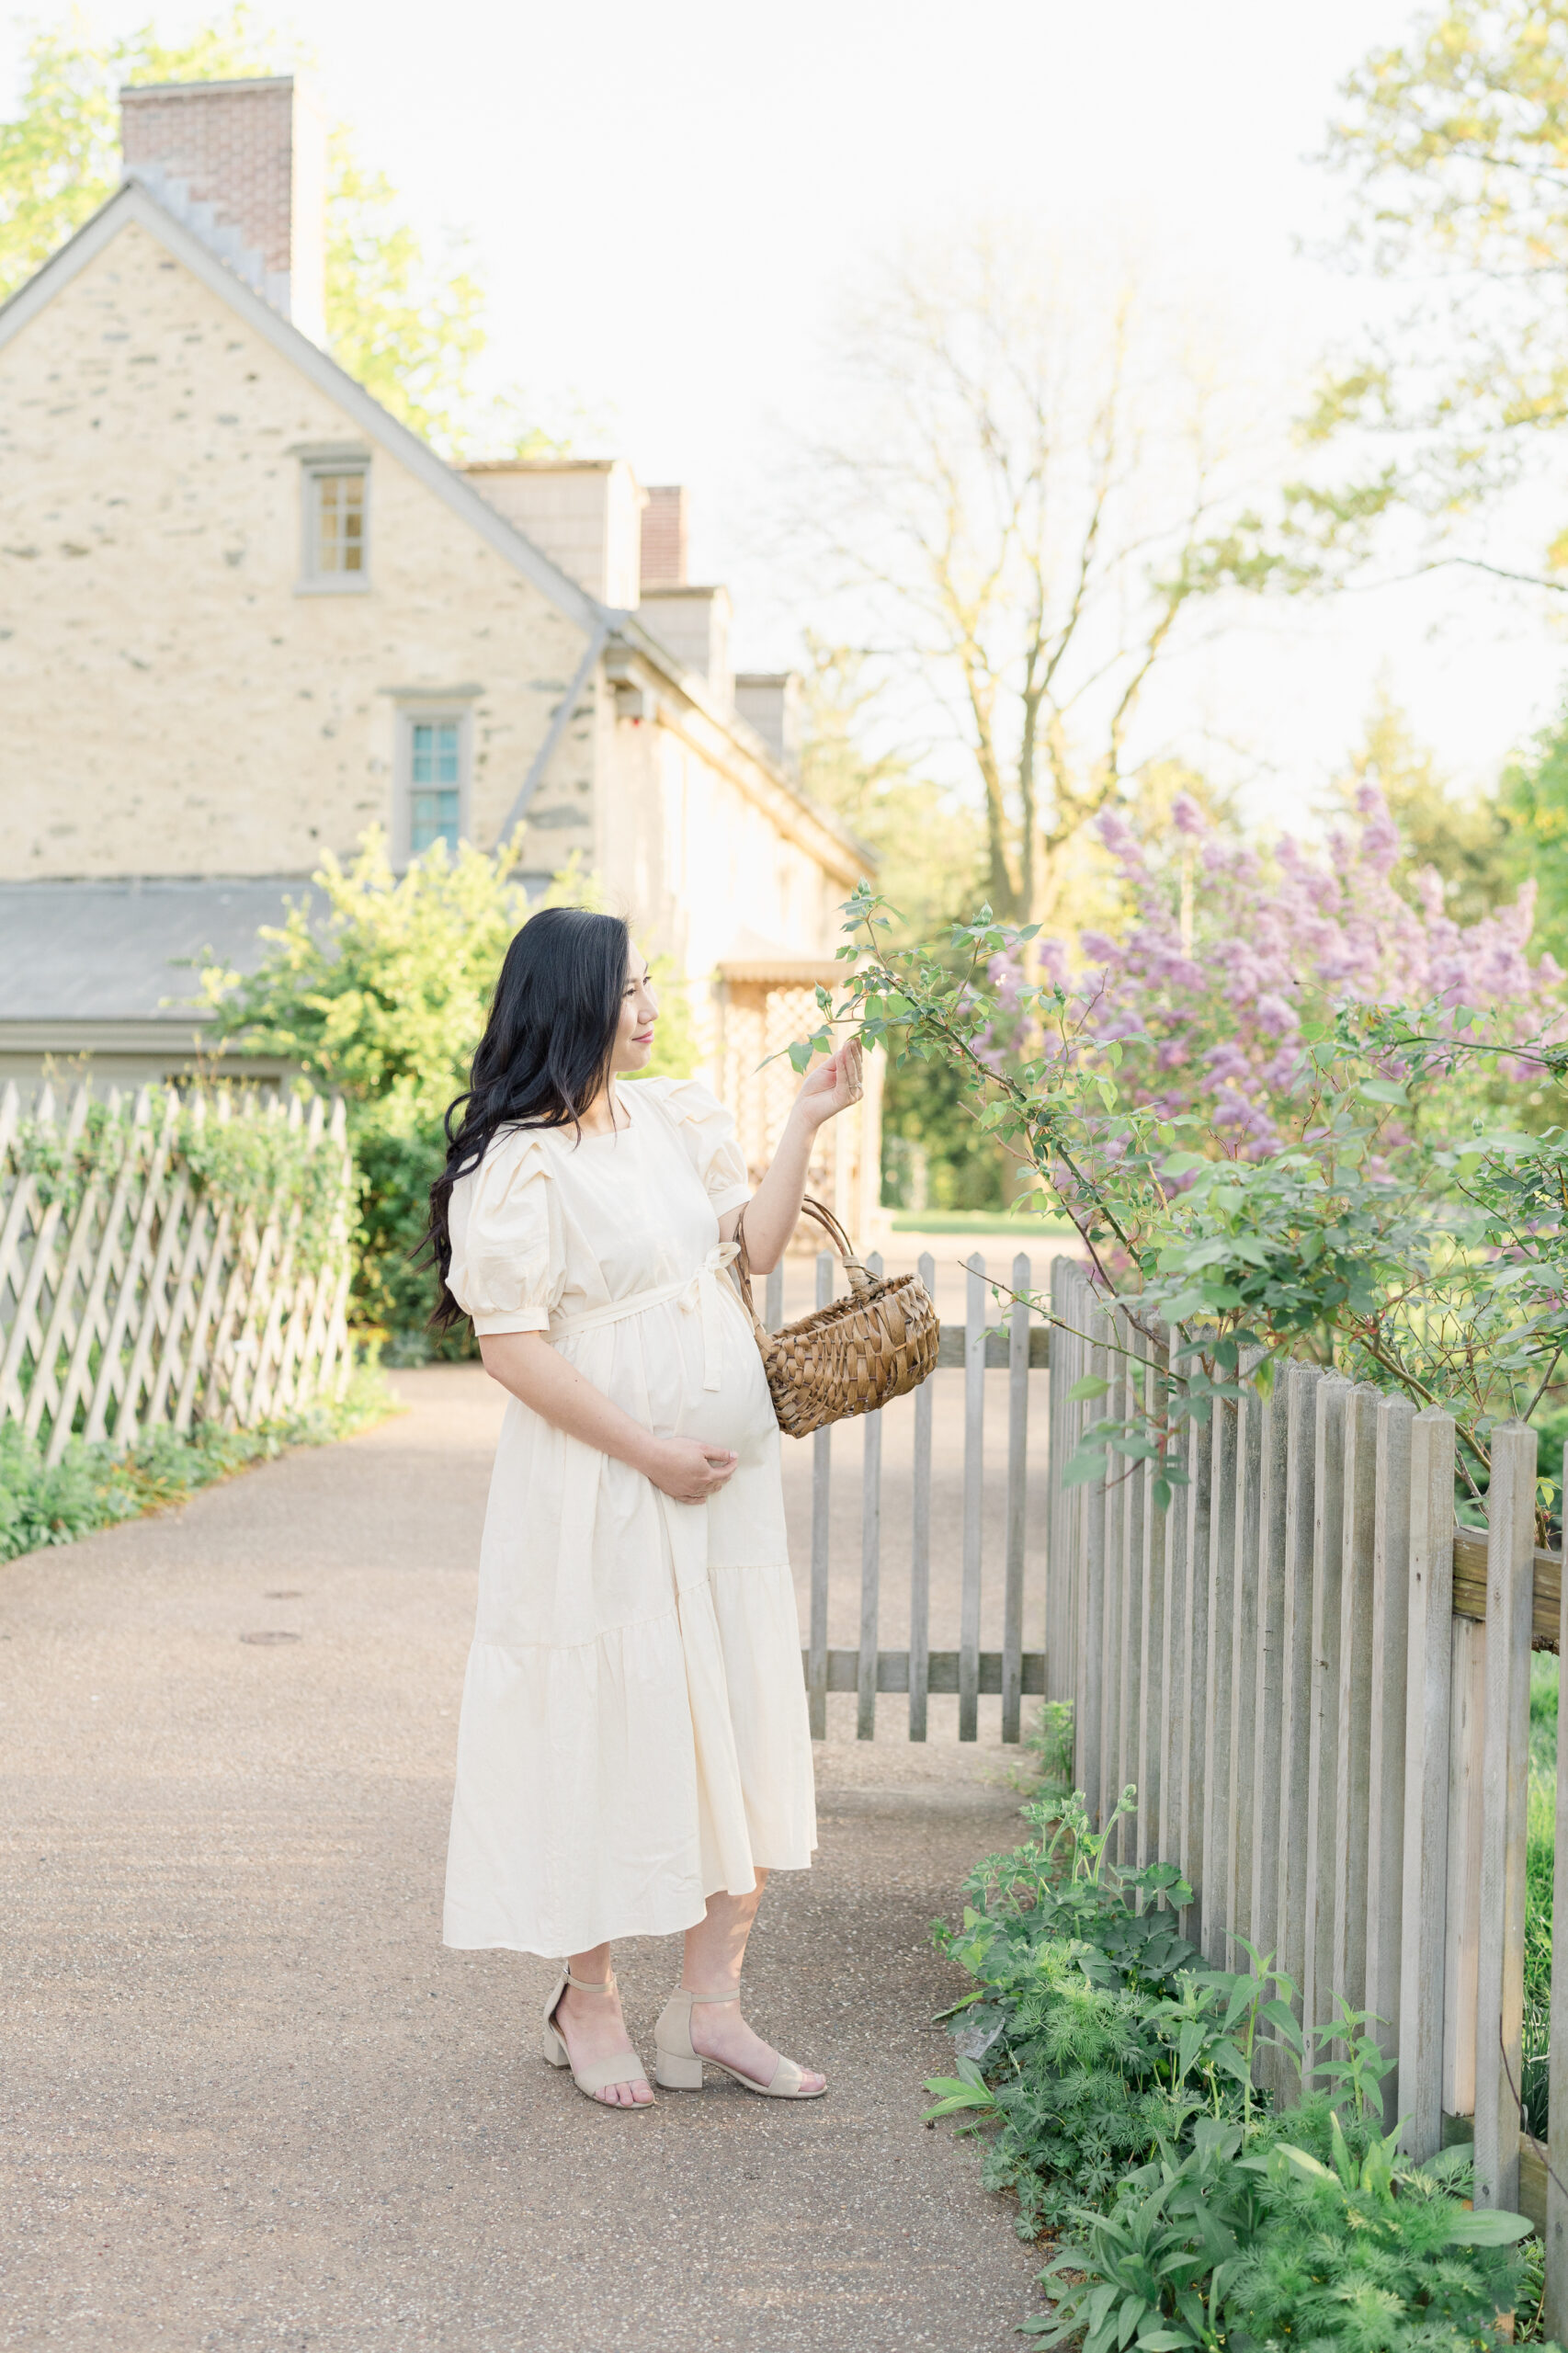 A mother expecting a little girl holds a gathering basket and is wearing a white dress for a whimsical pregnancy photoshoot.